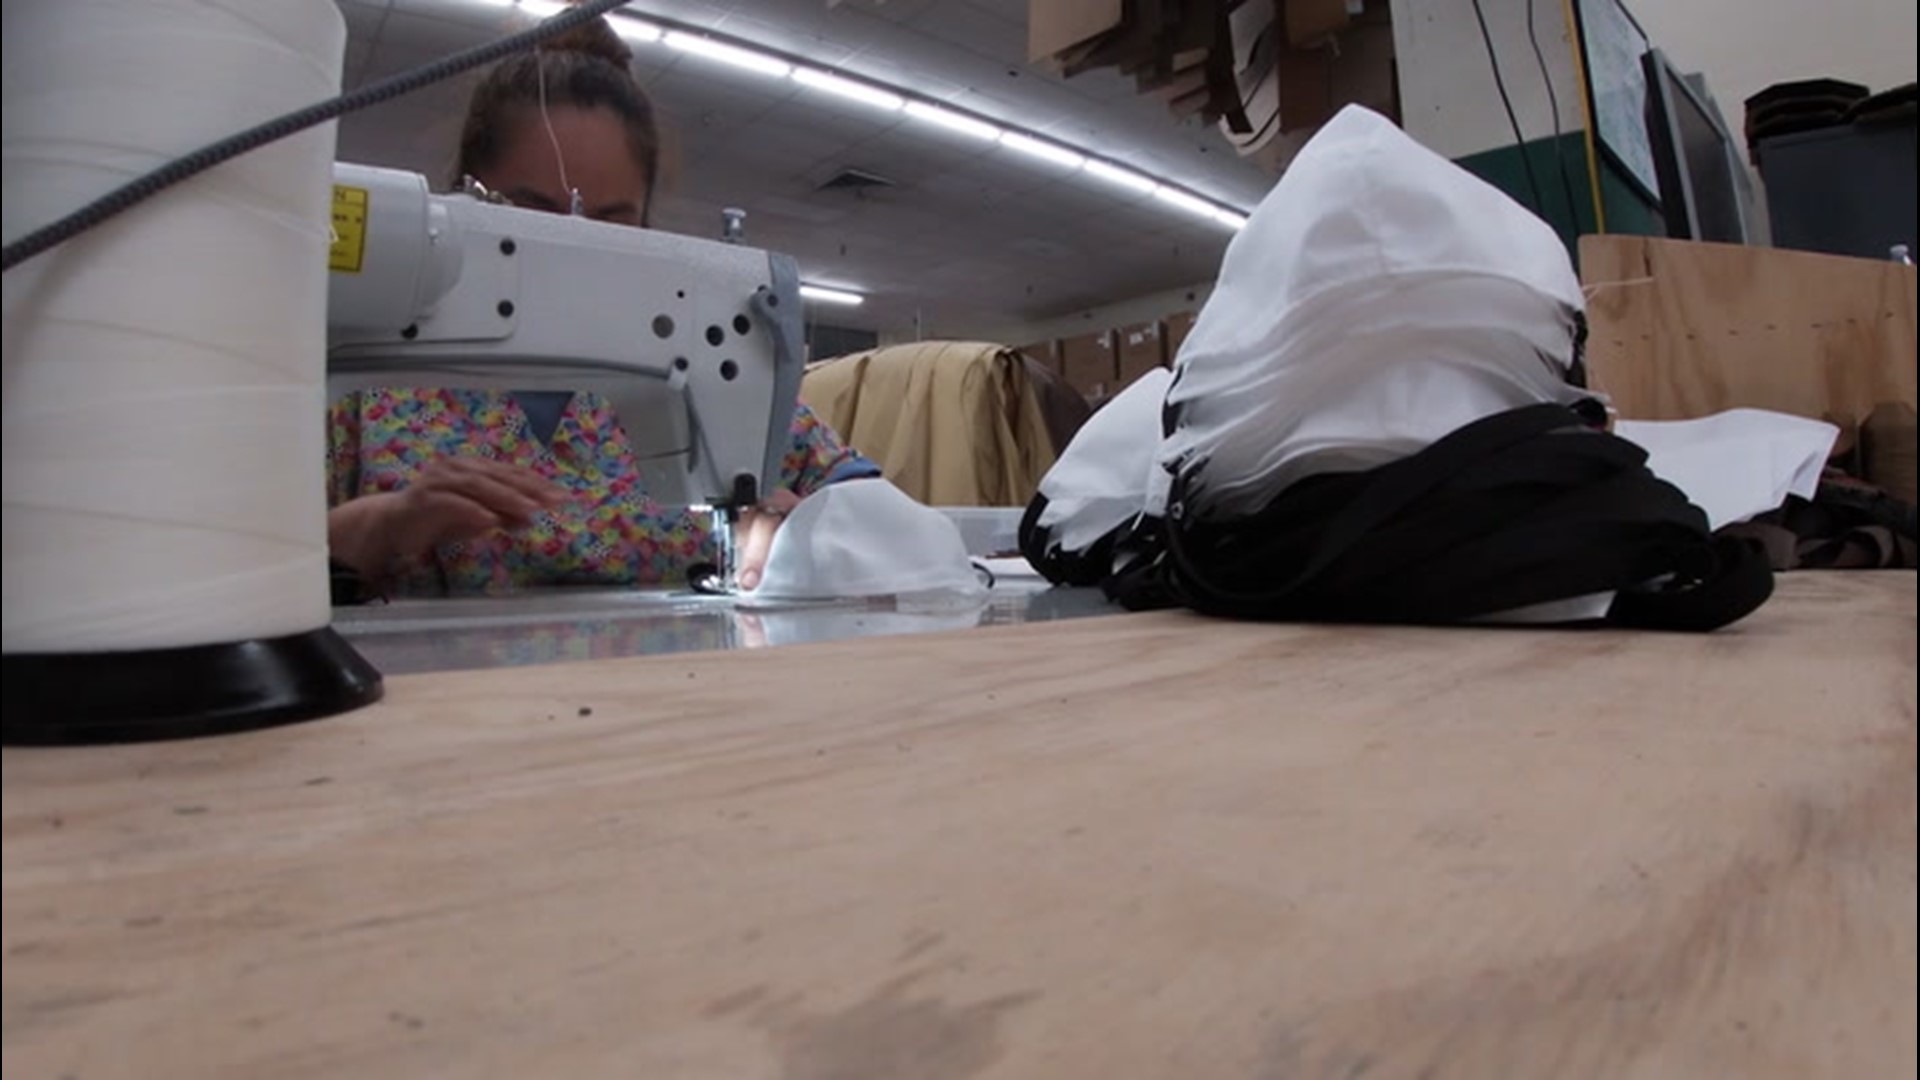 A small business in North Texas has transformed a furniture-making facility into a medical mask sewing center.